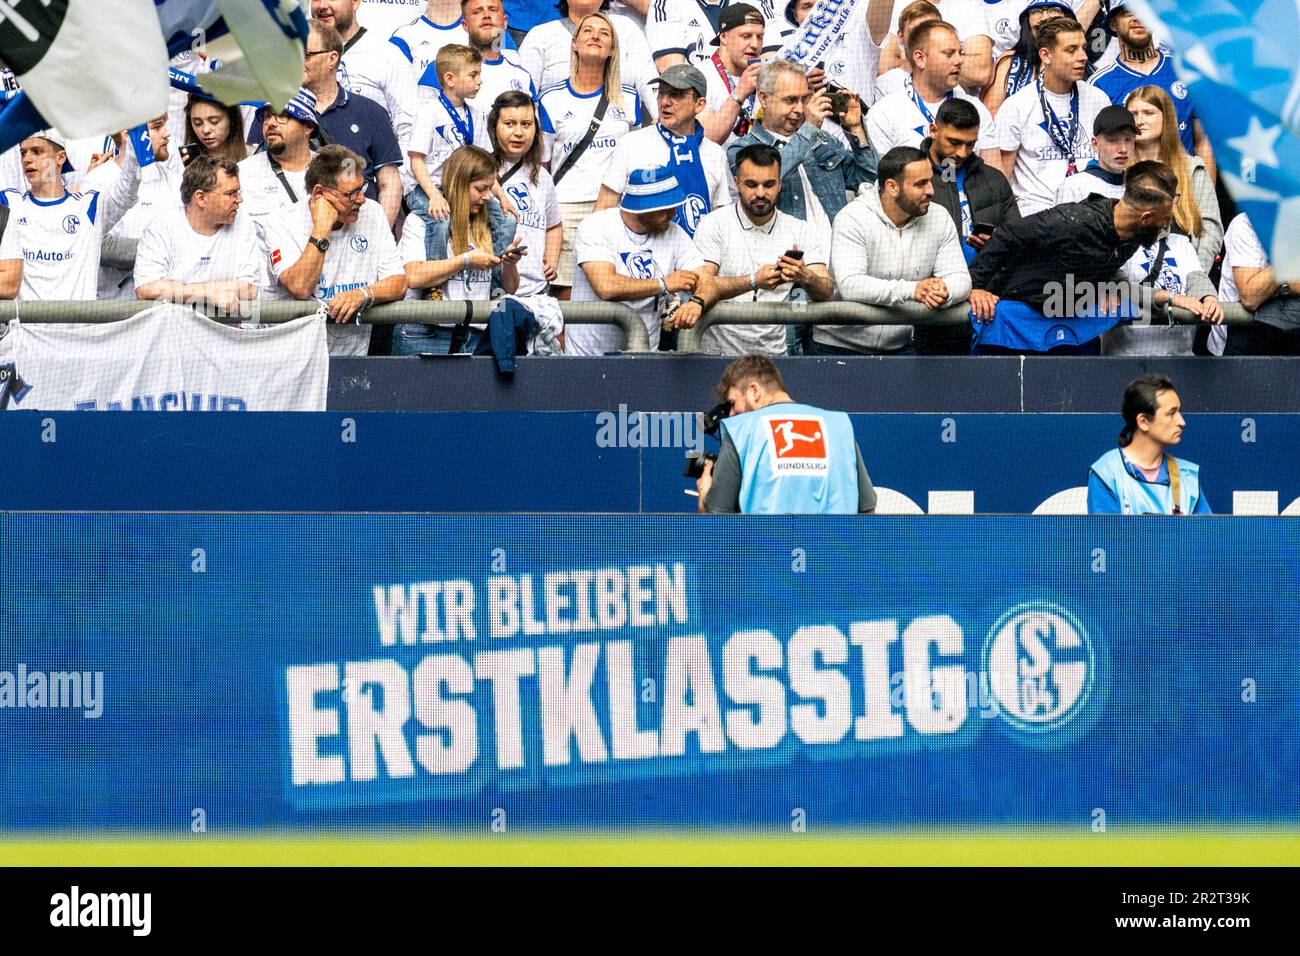 Gelsenkirchen, Germany. 20th May, 2023. Soccer: Bundesliga, FC Schalke 04 - Eintracht Frankfurt, match day 33, Veltins Arena: 'Wir bleiben erstklassig' is written on an advertising board. Credit: David Inderlied/dpa - IMPORTANT NOTE: In accordance with the requirements of the DFL Deutsche Fußball Liga and the DFB Deutscher Fußball-Bund, it is prohibited to use or have used photographs taken in the stadium and/or of the match in the form of sequence pictures and/or video-like photo series./dpa/Alamy Live News Stock Photo